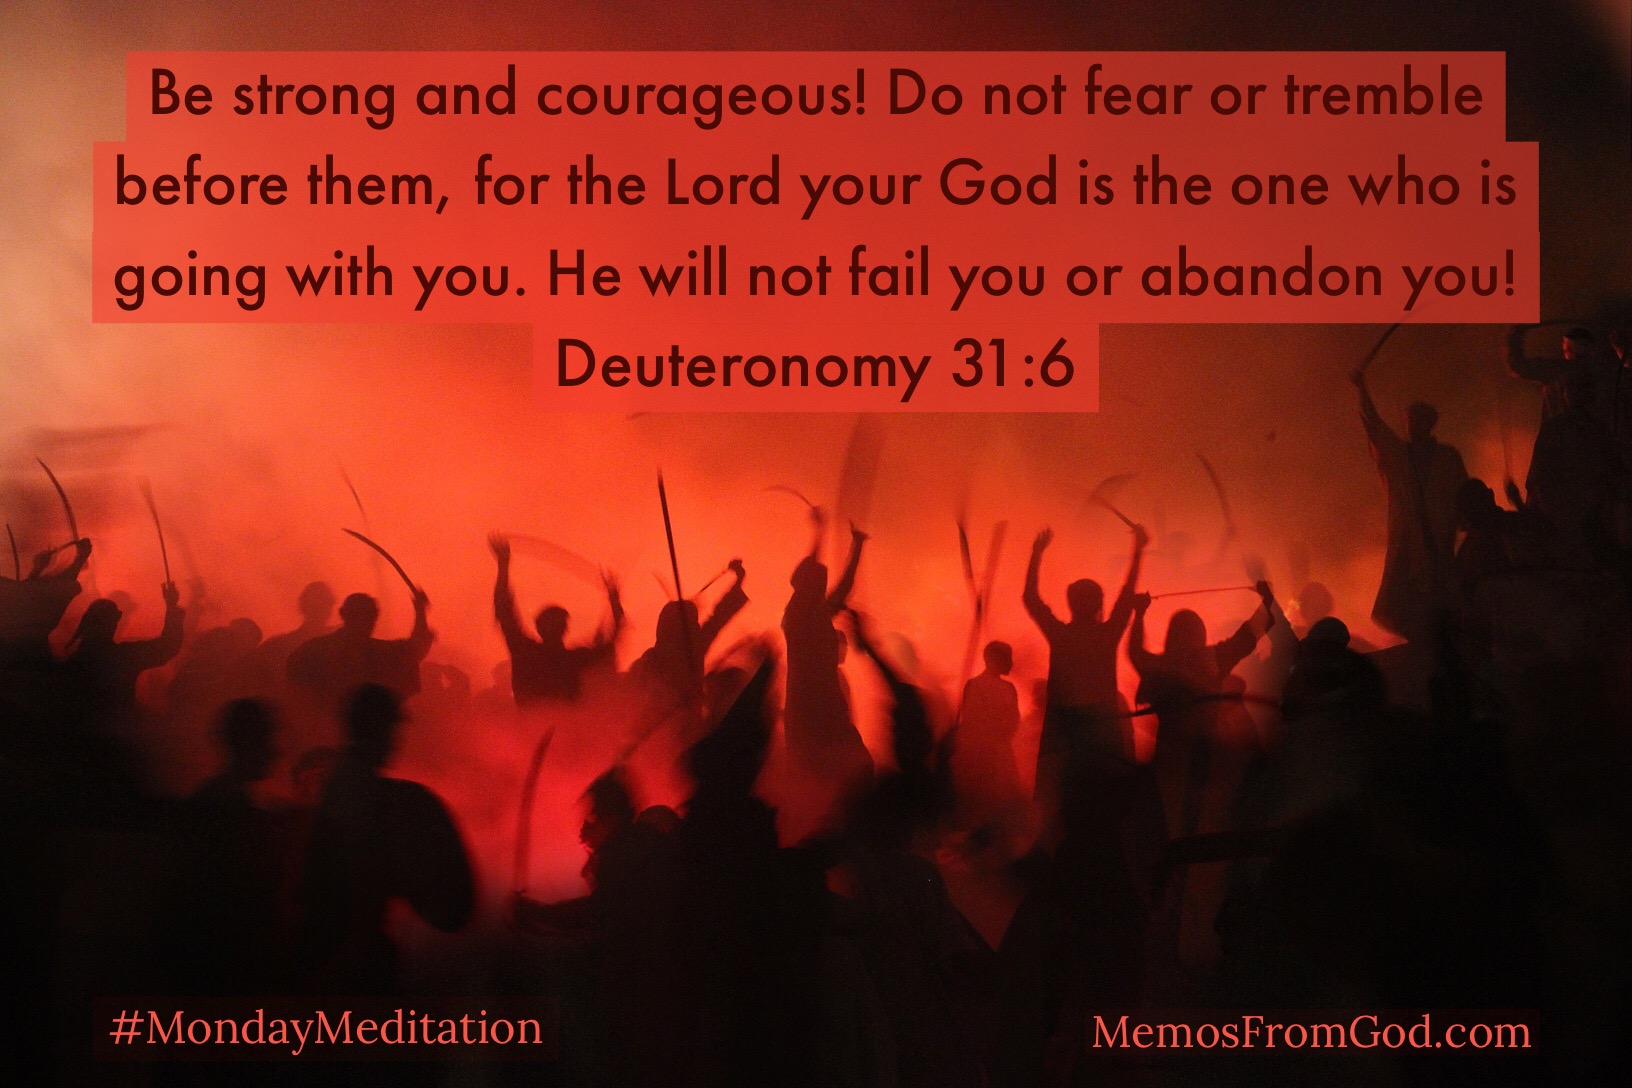 Be strong and courageous! Do not fear or tremble before them, for the Lord your God is the one who is going with you. He will not fail you or abandon you! Deuteronomy 31:6